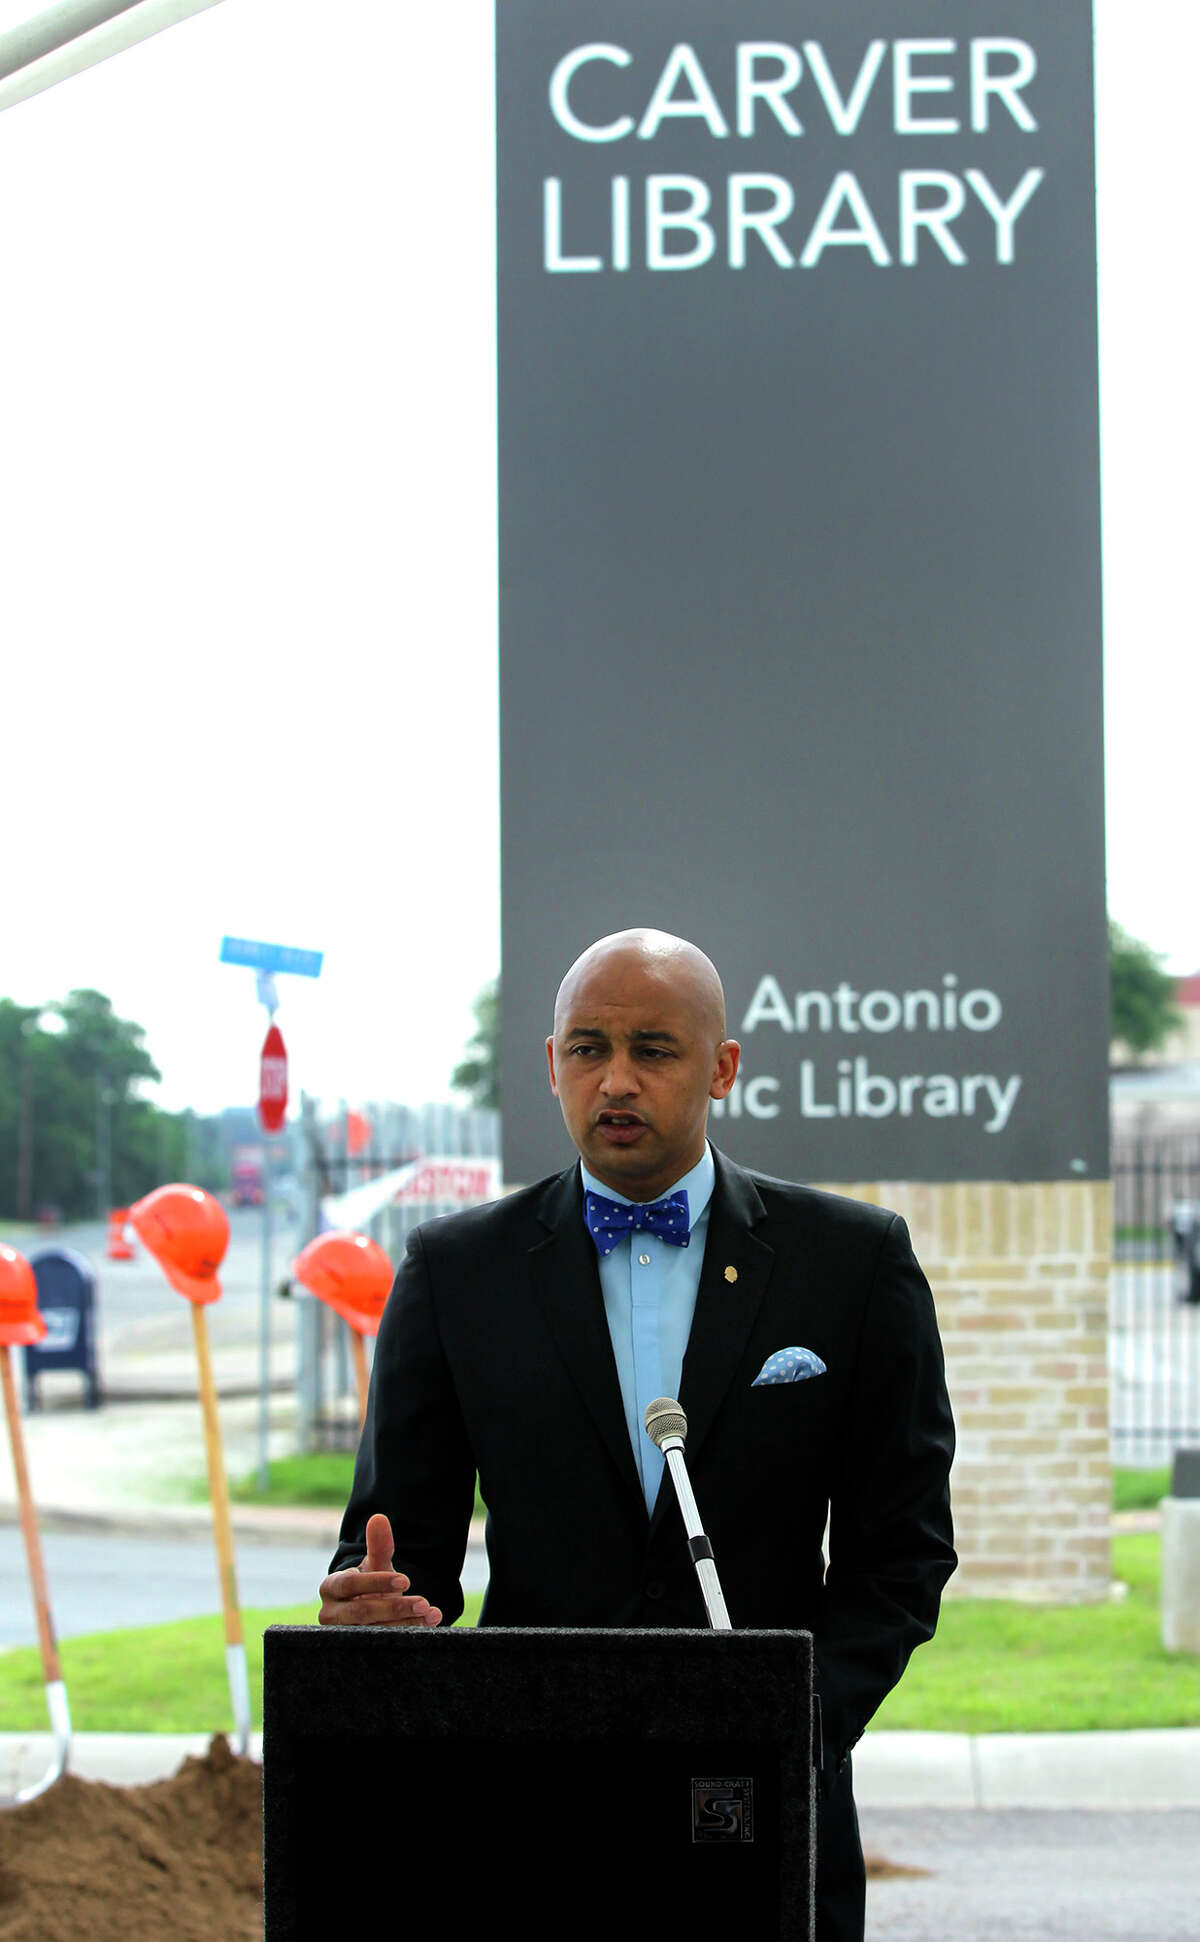 District 2 Councilman Alan E. Warrick II speaks Wednesday before a groundbreaking ceremony at the Carver Branch Library for a new bridge. The Commerce Street bridge, in the 3400 block of East Commerce over Salado Creek, will be rebuilt and Commerce Street will be reconstructed from East Houston Street to North Rio Grande Street. The bridge will have four lanes and sidewalks on each side with a connection to the hike-and-bike trail below on the Salado Creek Greenway. The project is funded with $11 million from the voter-approved 2012-2017 bond.